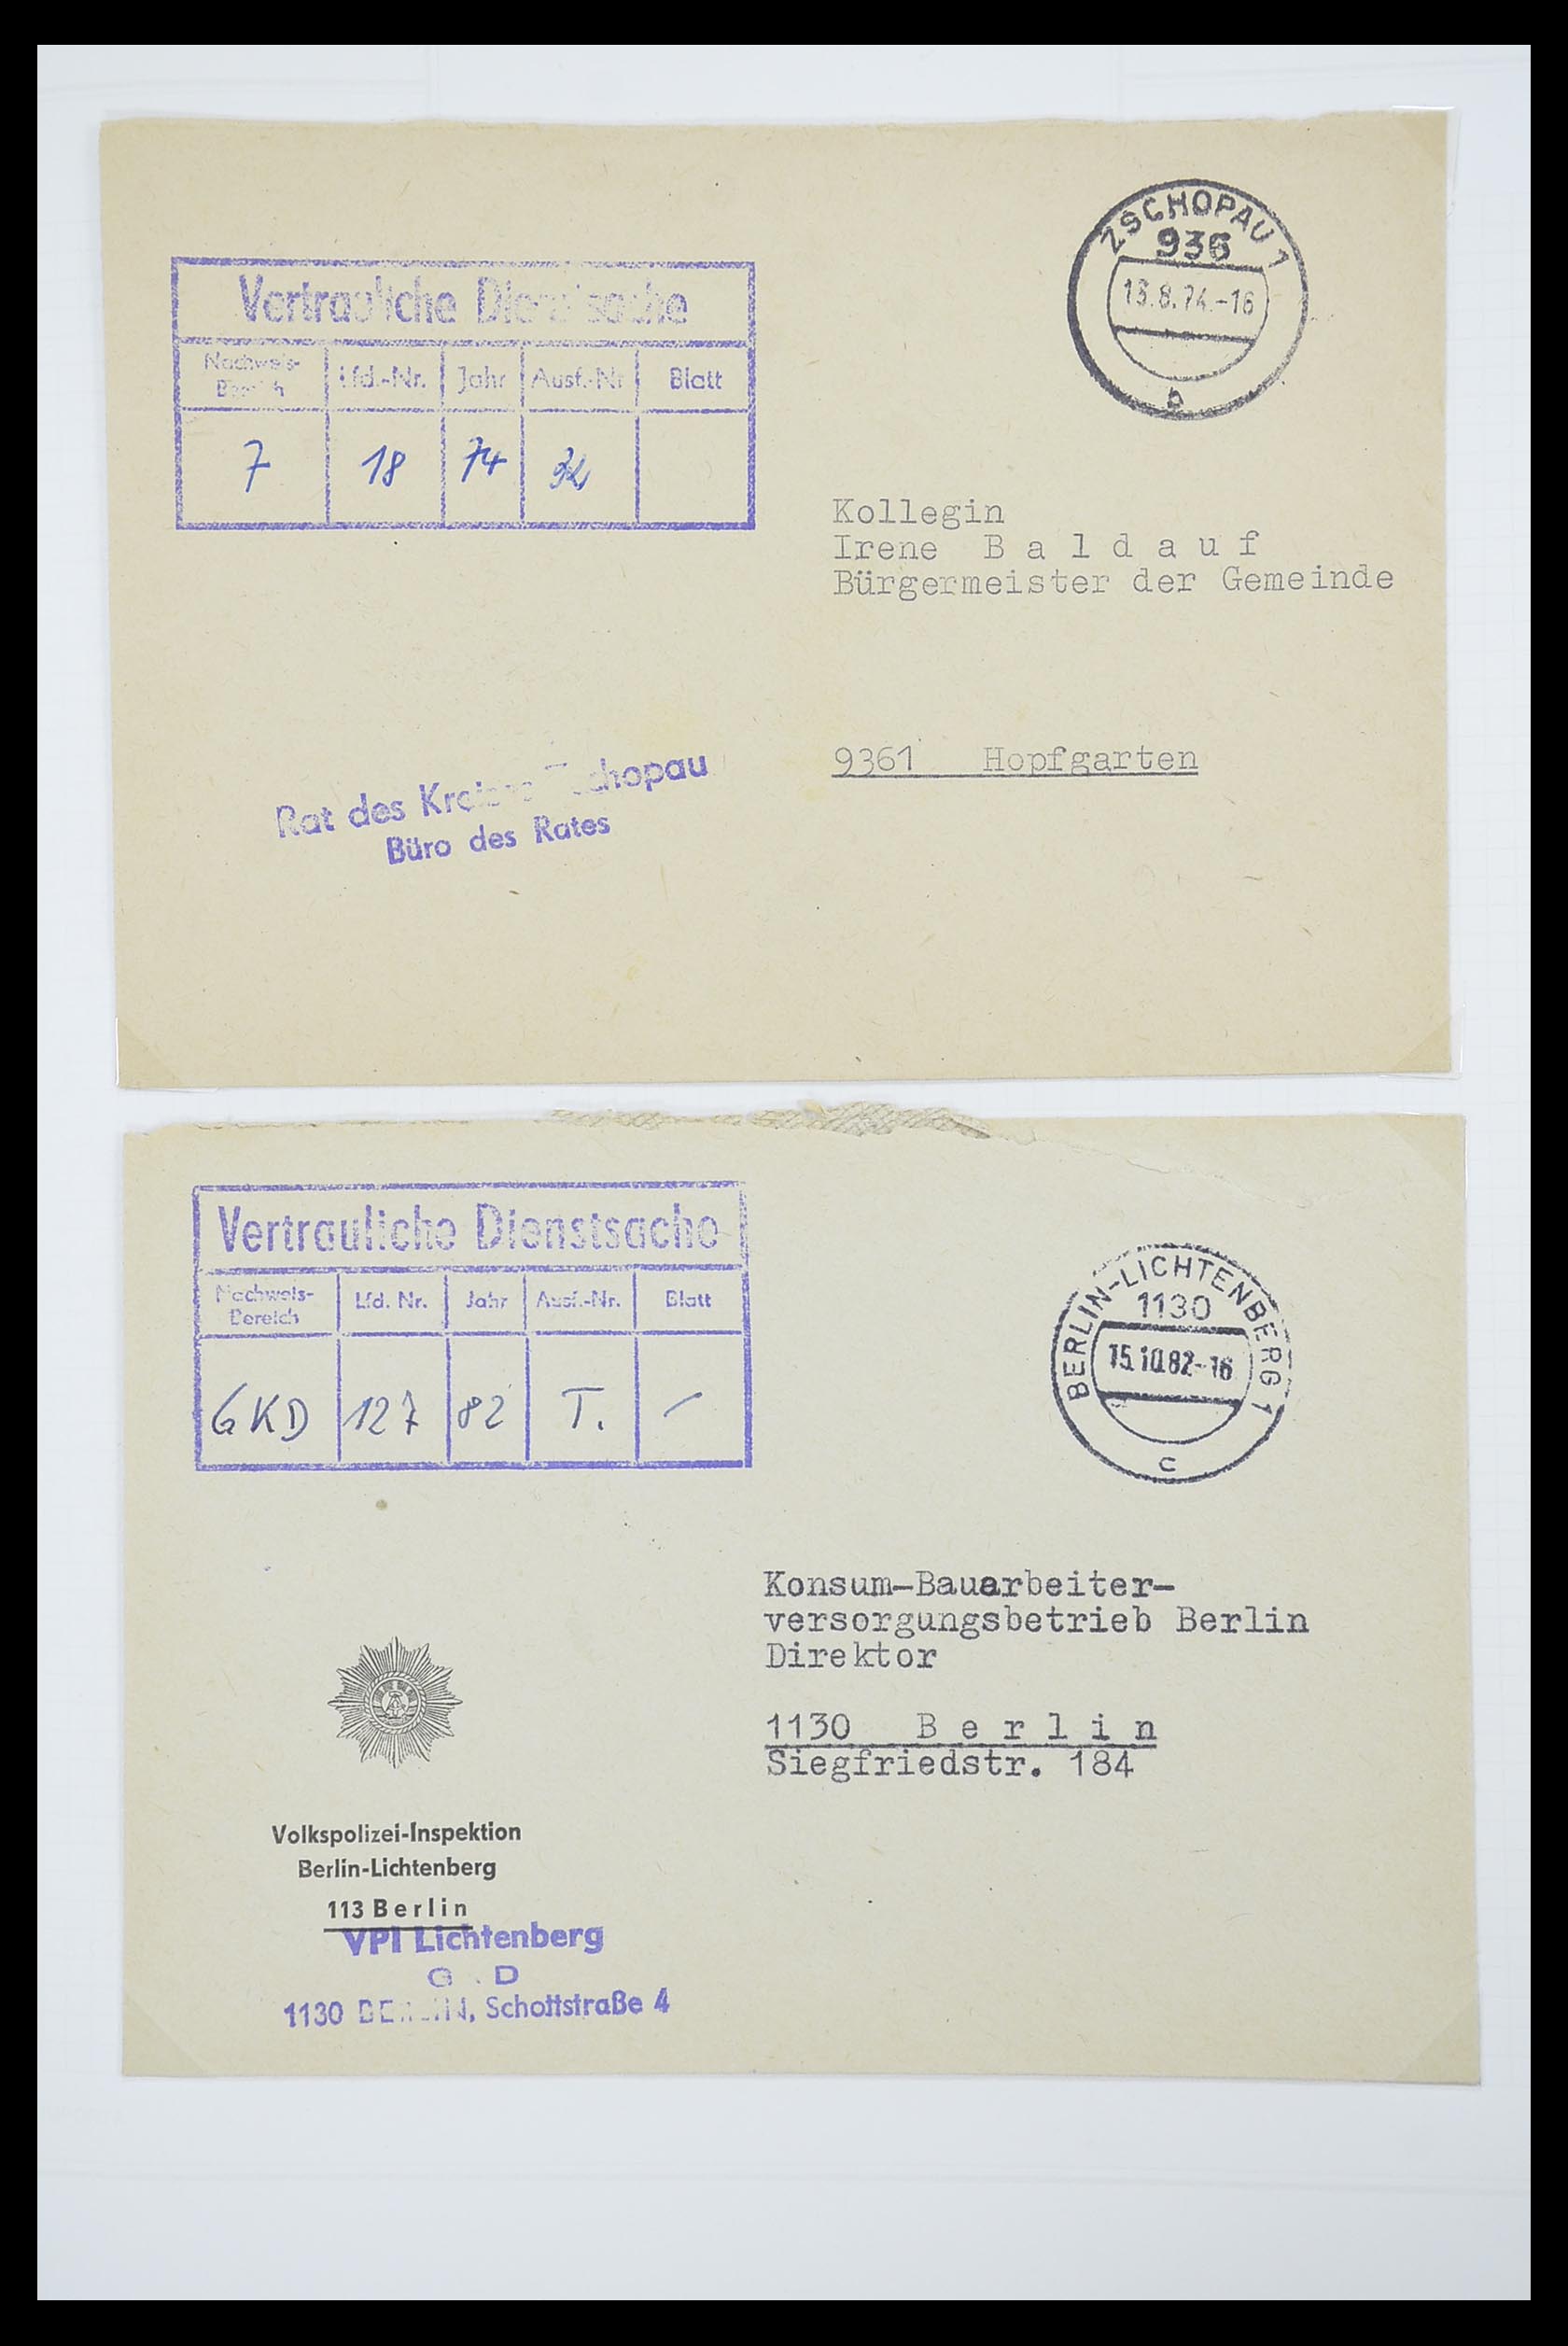 33883 038 - Stamp collection 33883 DDR service covers 1956-1986.